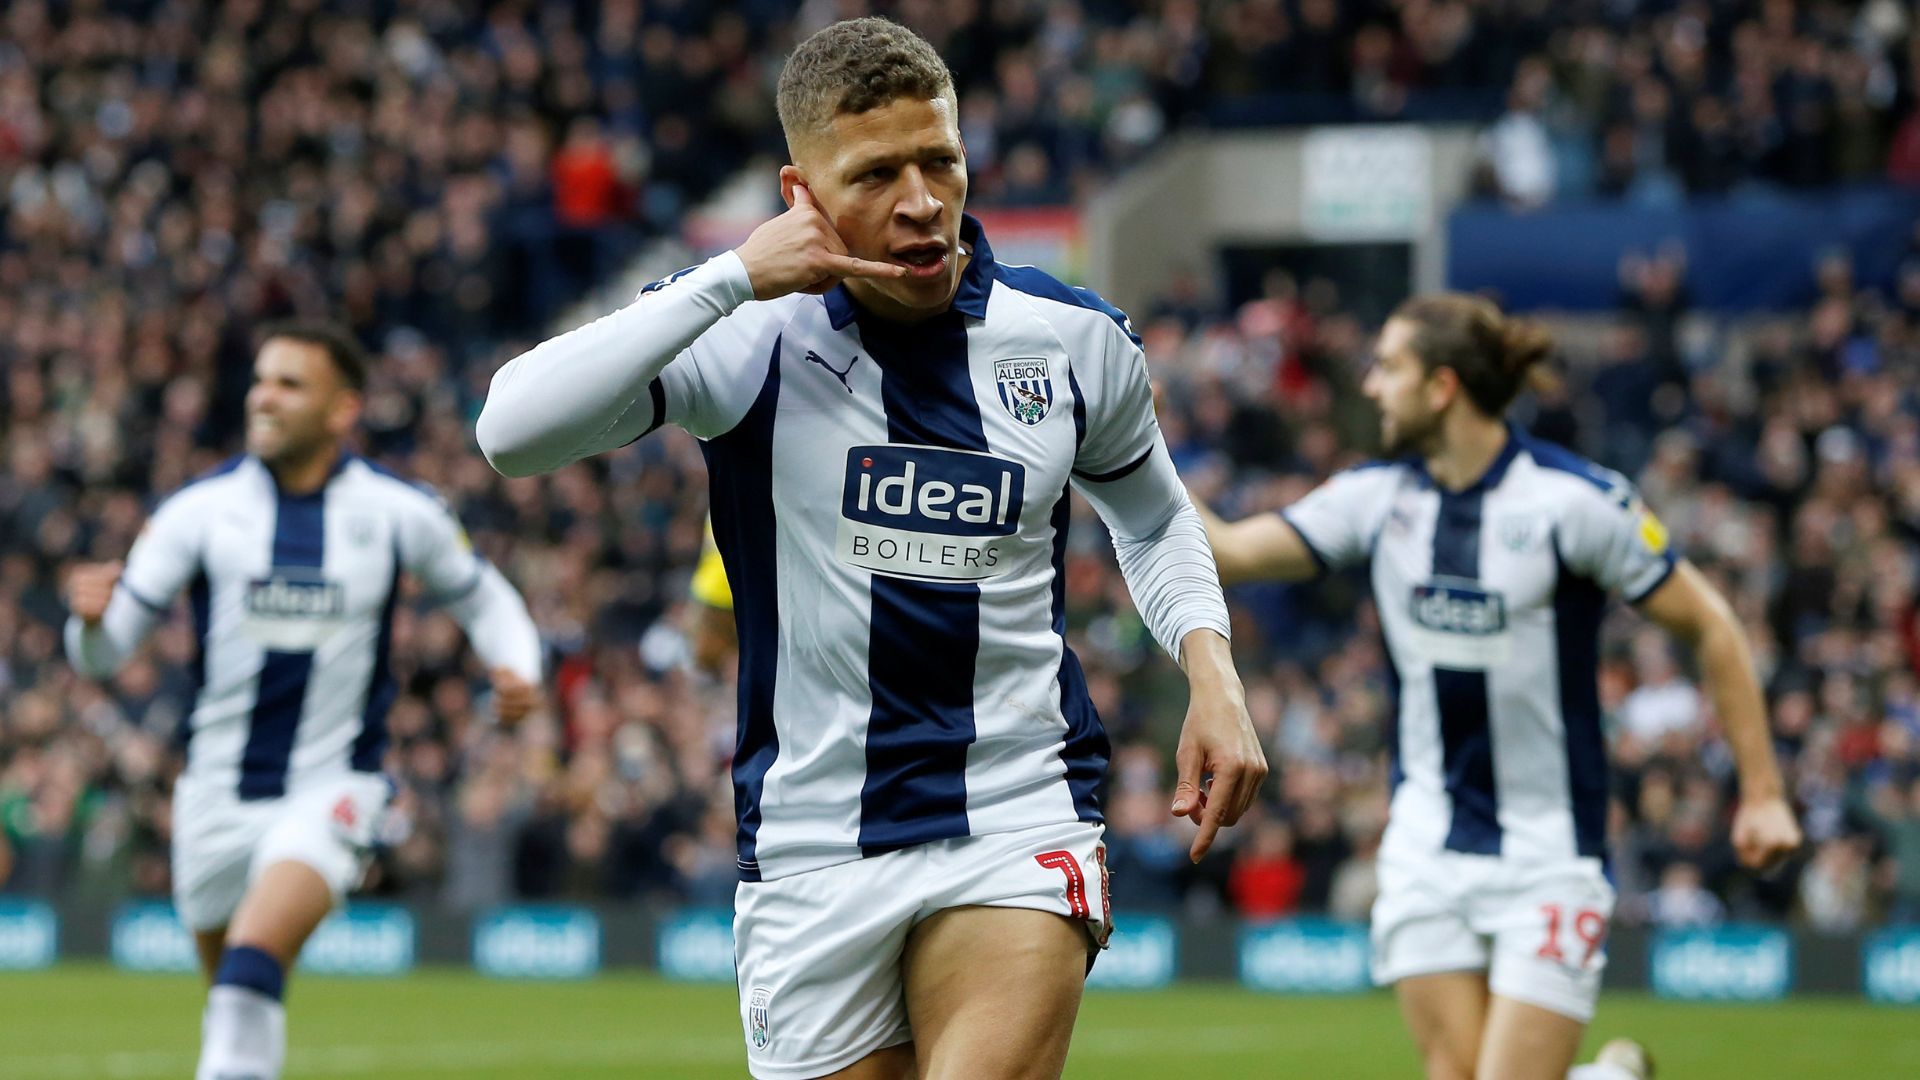 DWIGHT GAYLE- WEST BROMWICH ALBION-1